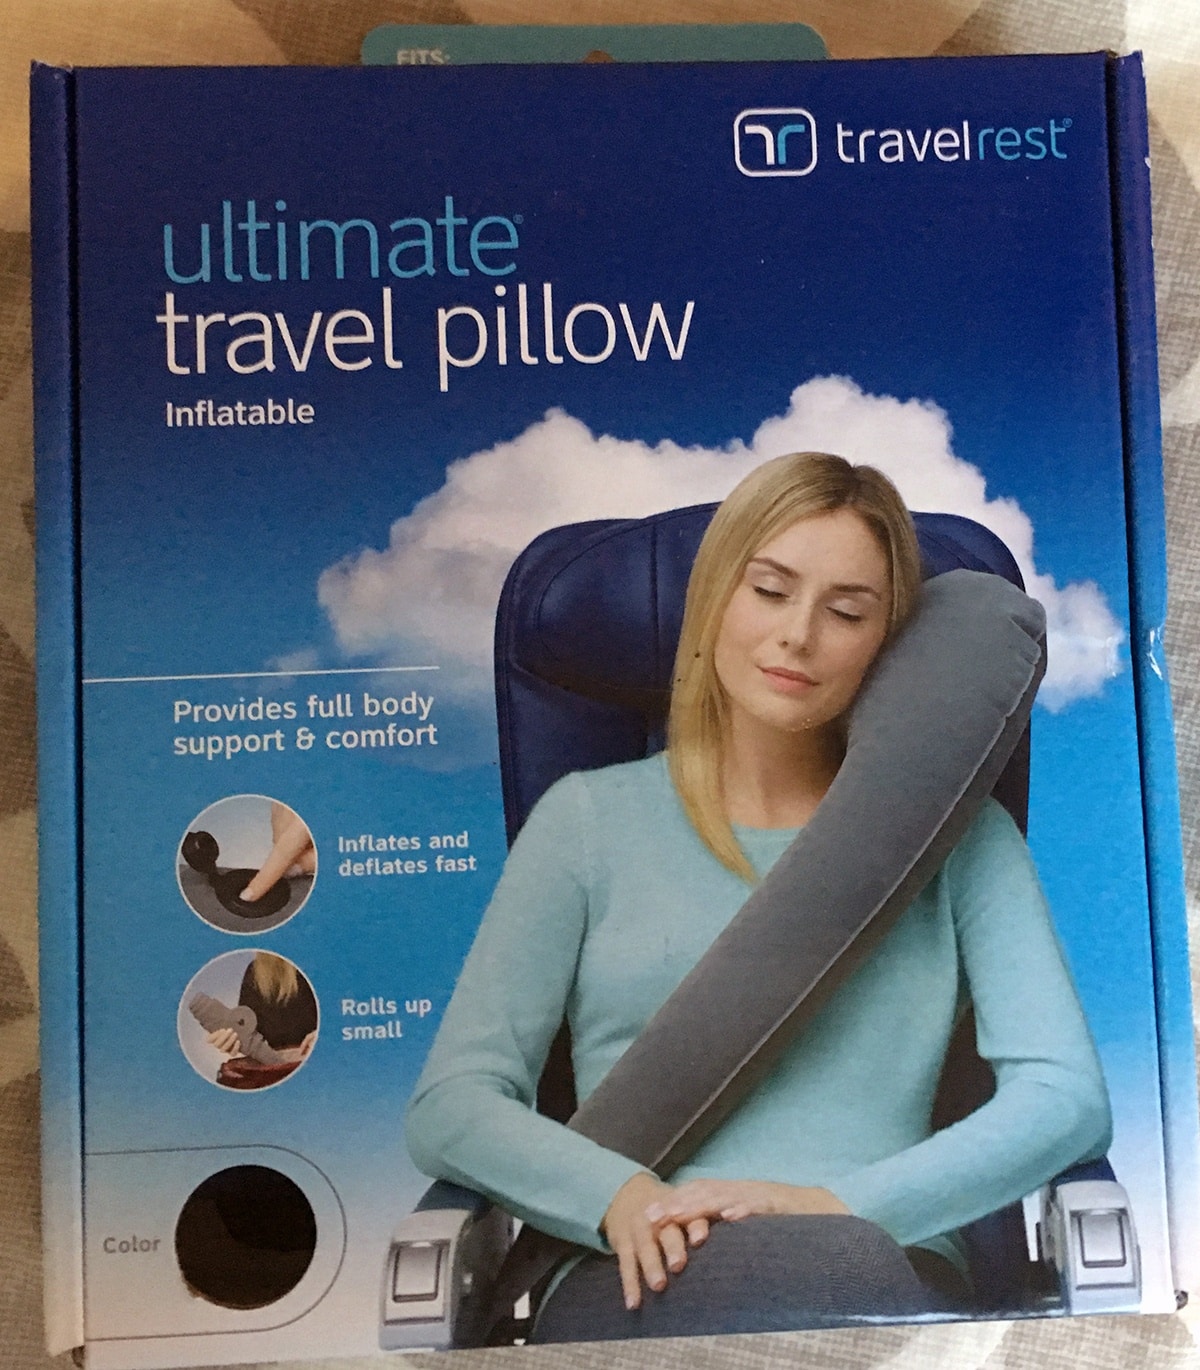 Travelrest Ultimate Inflatable Travel Pillow in packaging